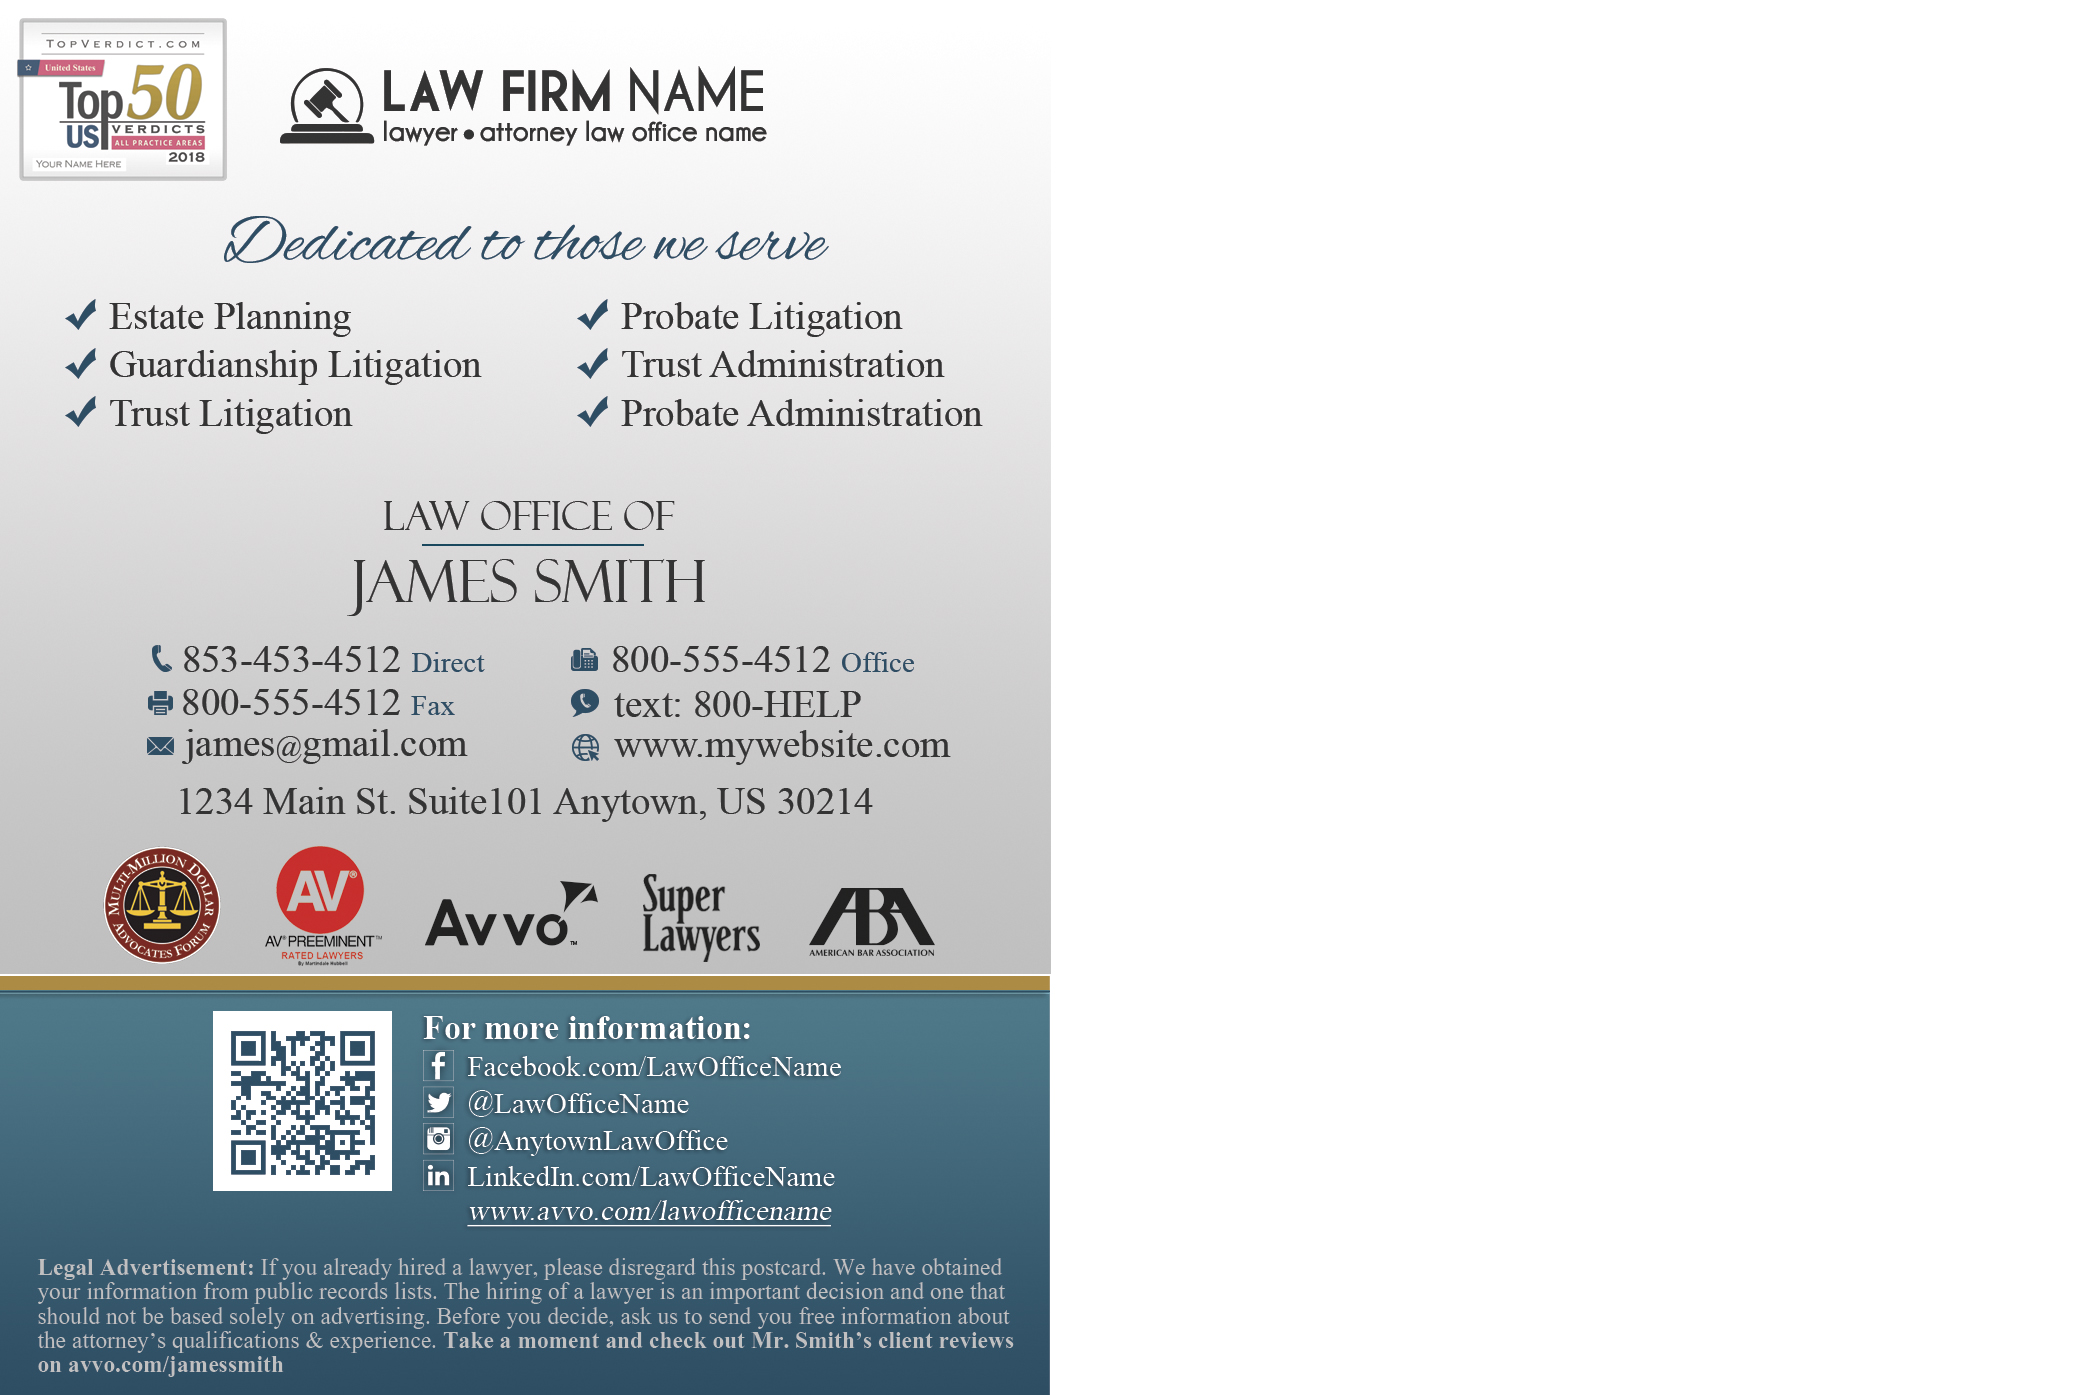 Lawyer Postcards, Law Firm Postcards, Attorney Postcards, Legal Postcards, Law Office Postcards, Criminal Defense Postcards, Personal Injury Postcards, Medical Malpractice Postcards, Auto Accidents Postcards